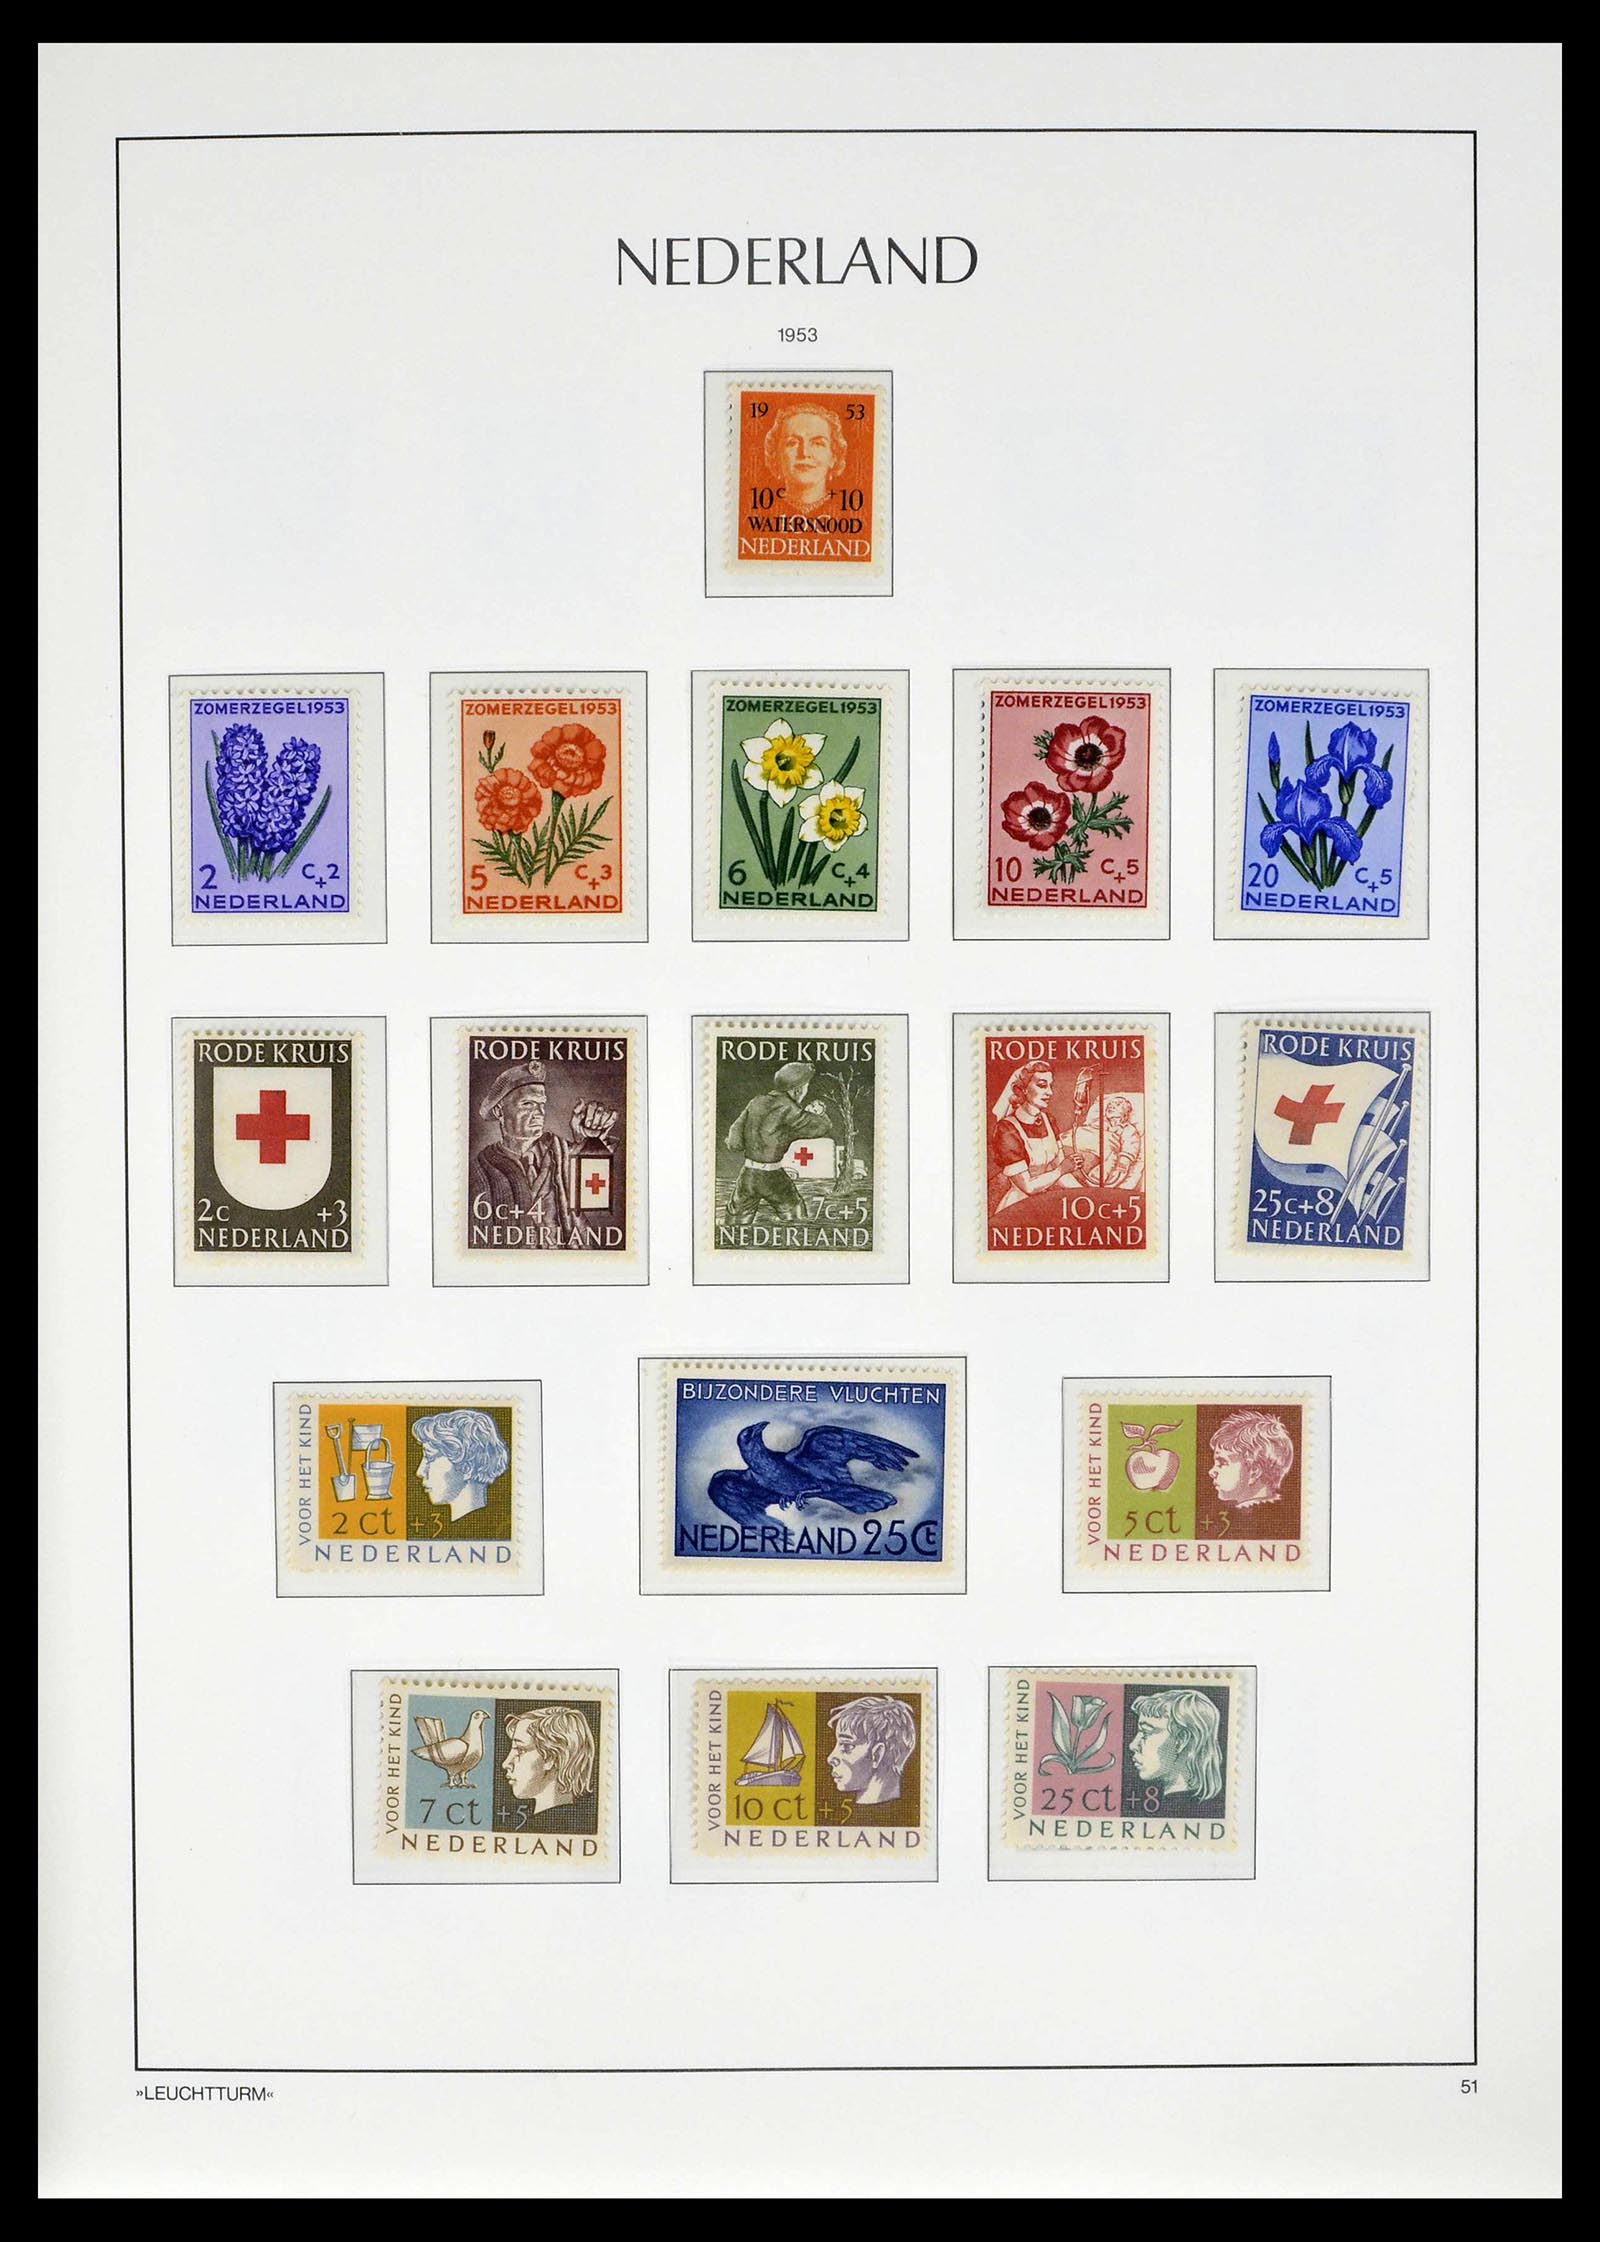 39135 0075 - Stamp collection 39135 Netherlands 1852-1969.